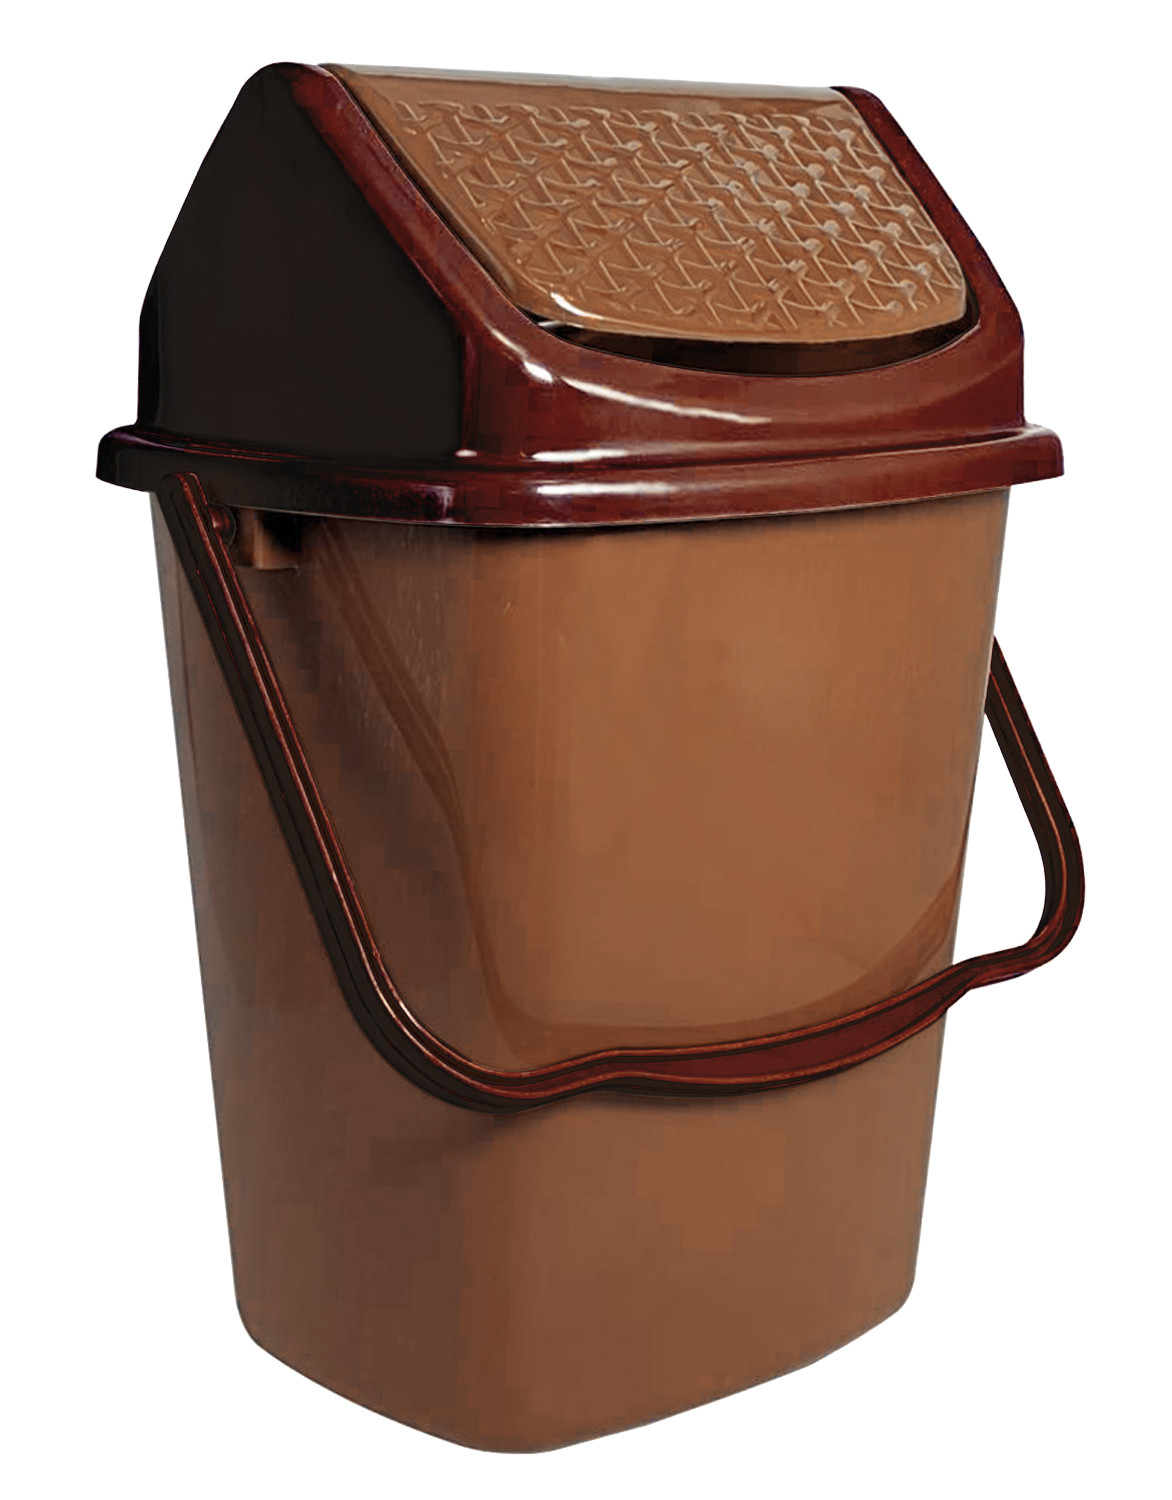 Kuber Industries Delight Plastic Swing  Garbage Waste Dustbin for Home, Office with Handle, 5 Liters (Green & Light Brown)